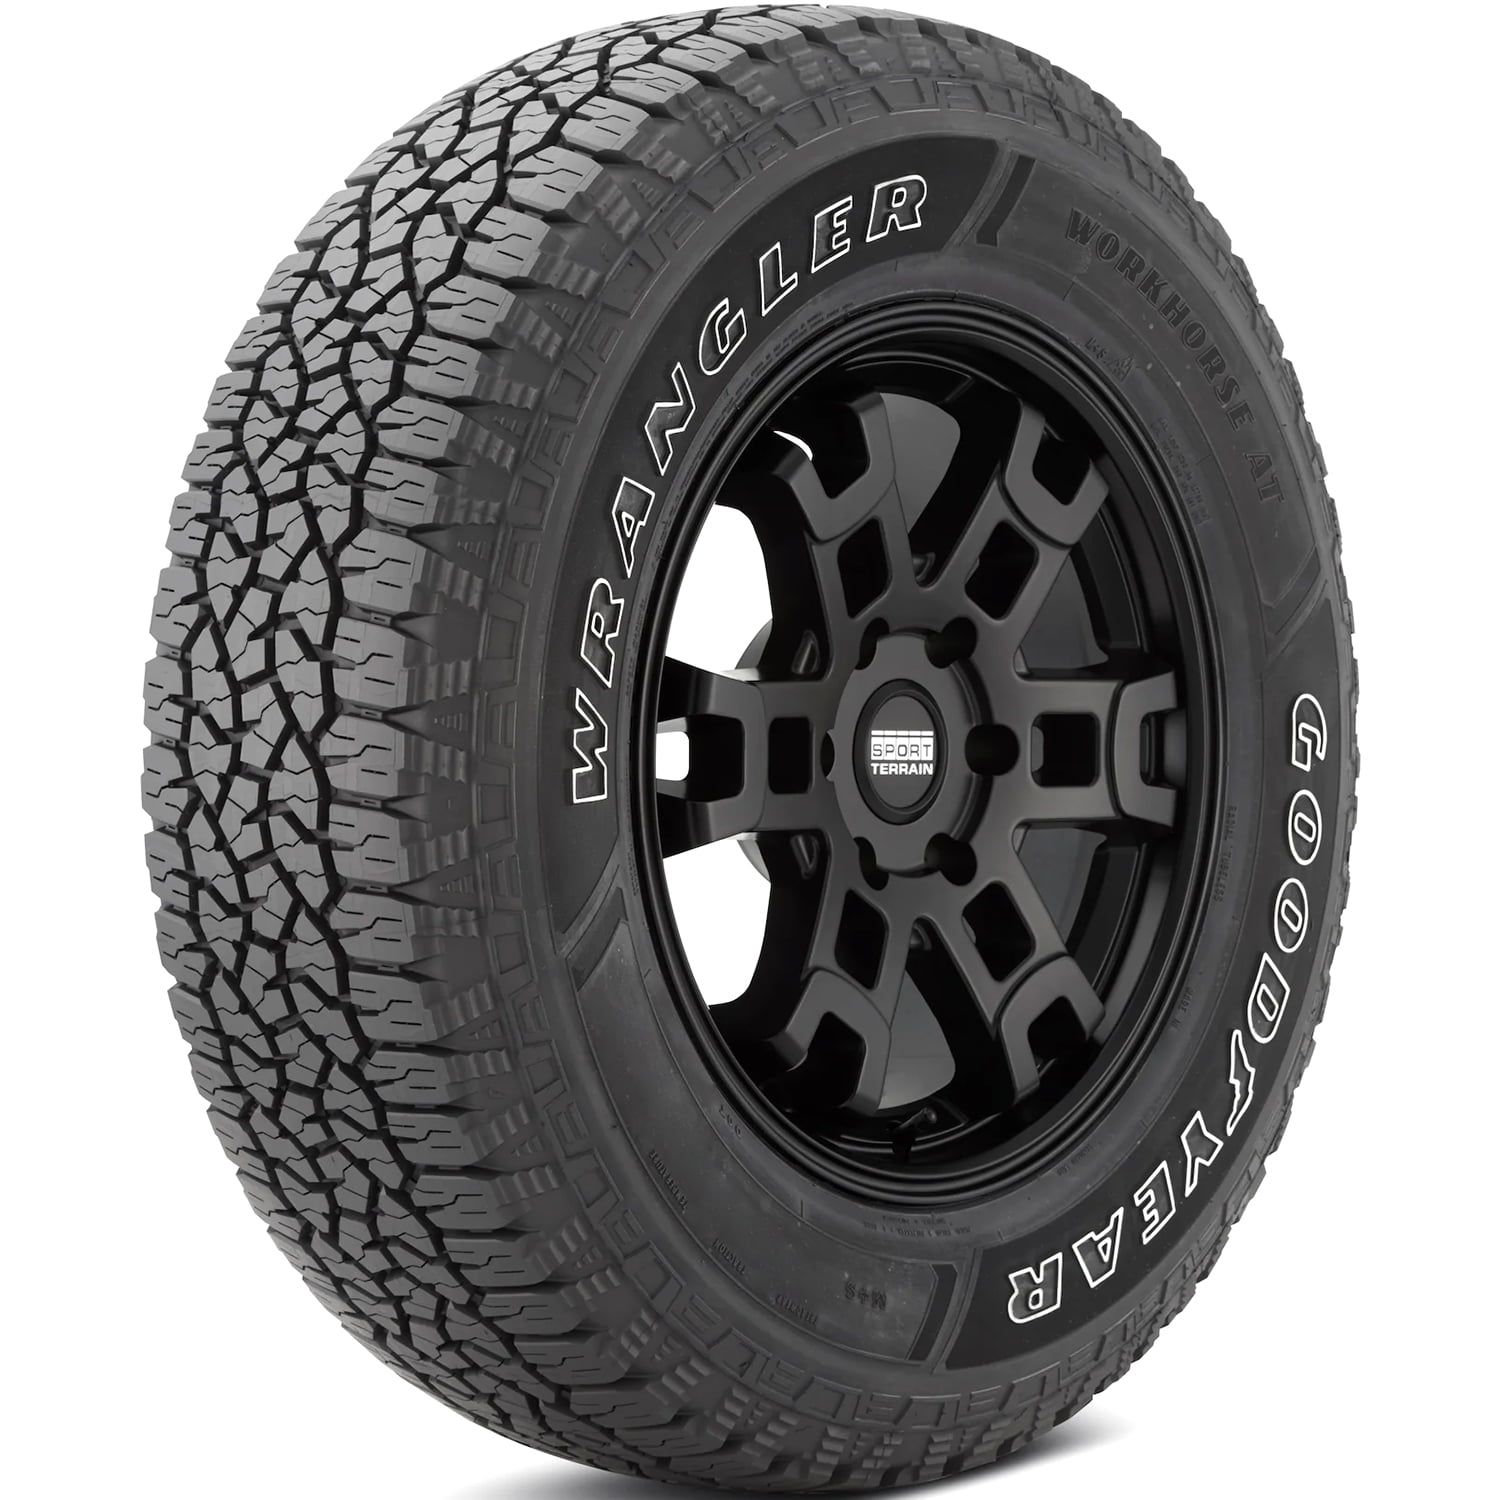 Goodyear Wrangler Workhorse AT 265/70R17 115T A/T All Terrain Tire -  